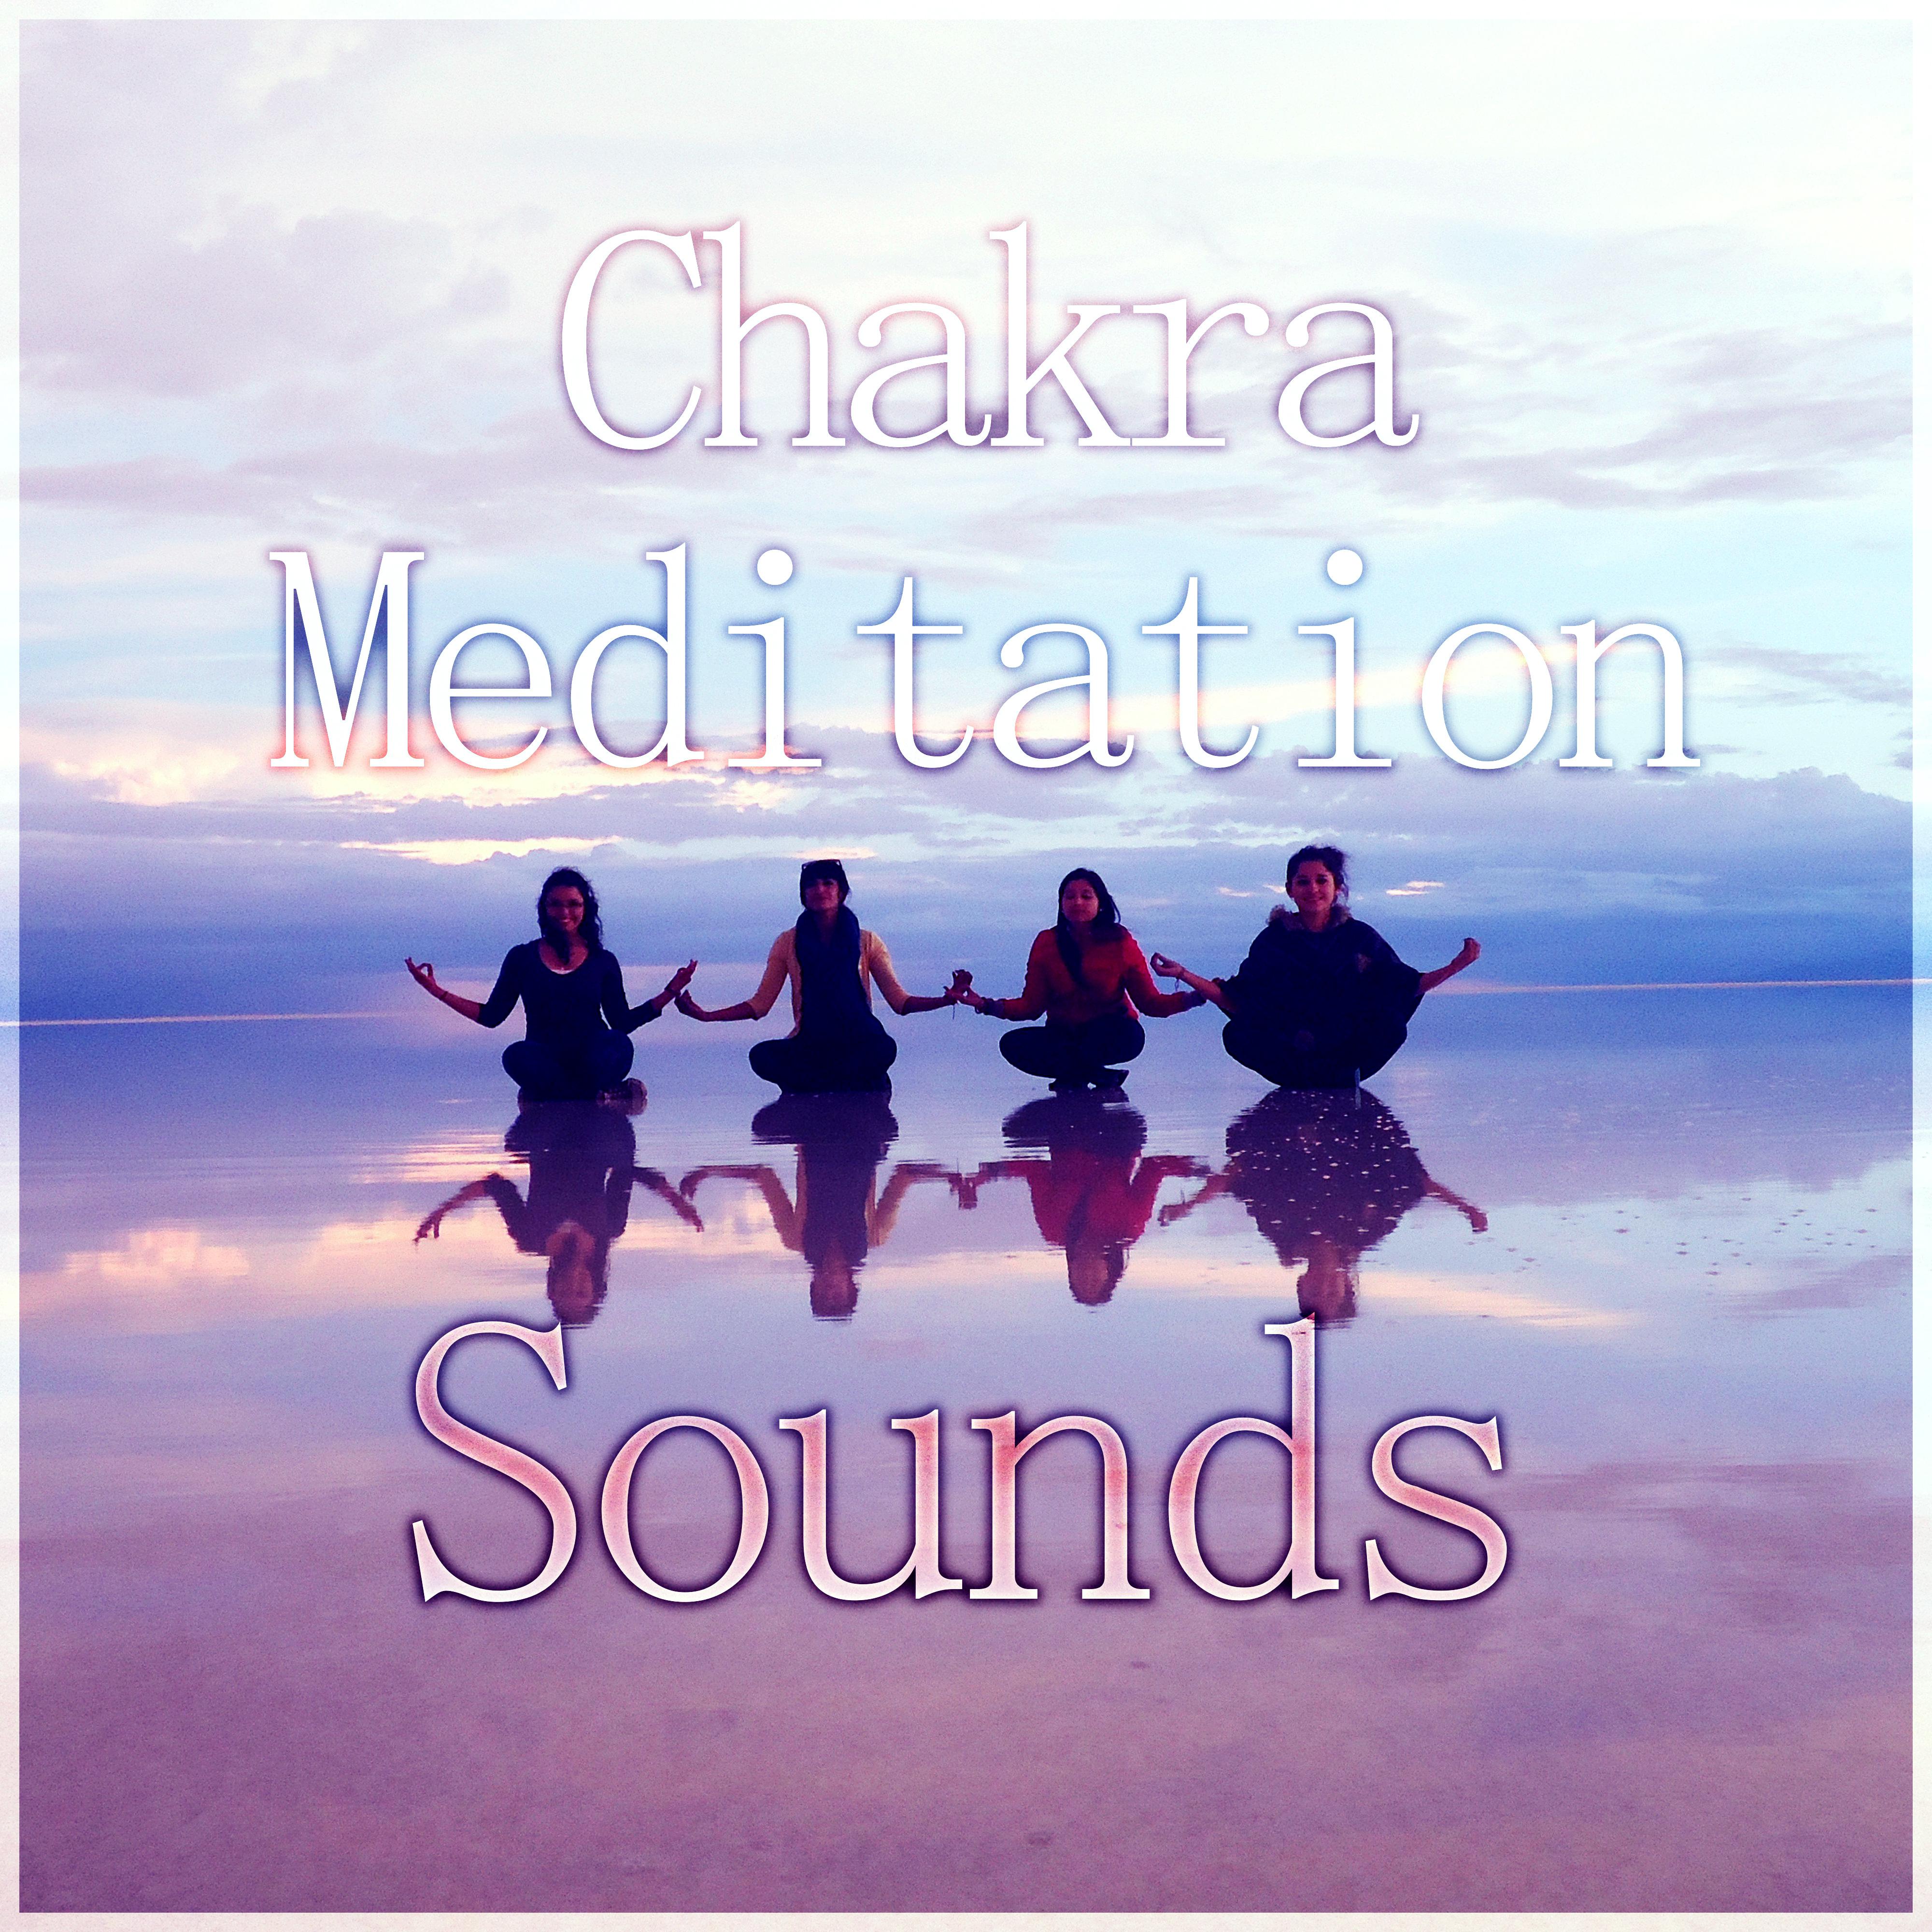 Chakra Meditation Sounds - Massage & Spa Music, Serenity Relaxing Spa Music, Instrumental Music for Massage Therapy, Piano Music and Sounds of Nature Music for Relaxation, Reiki New Age